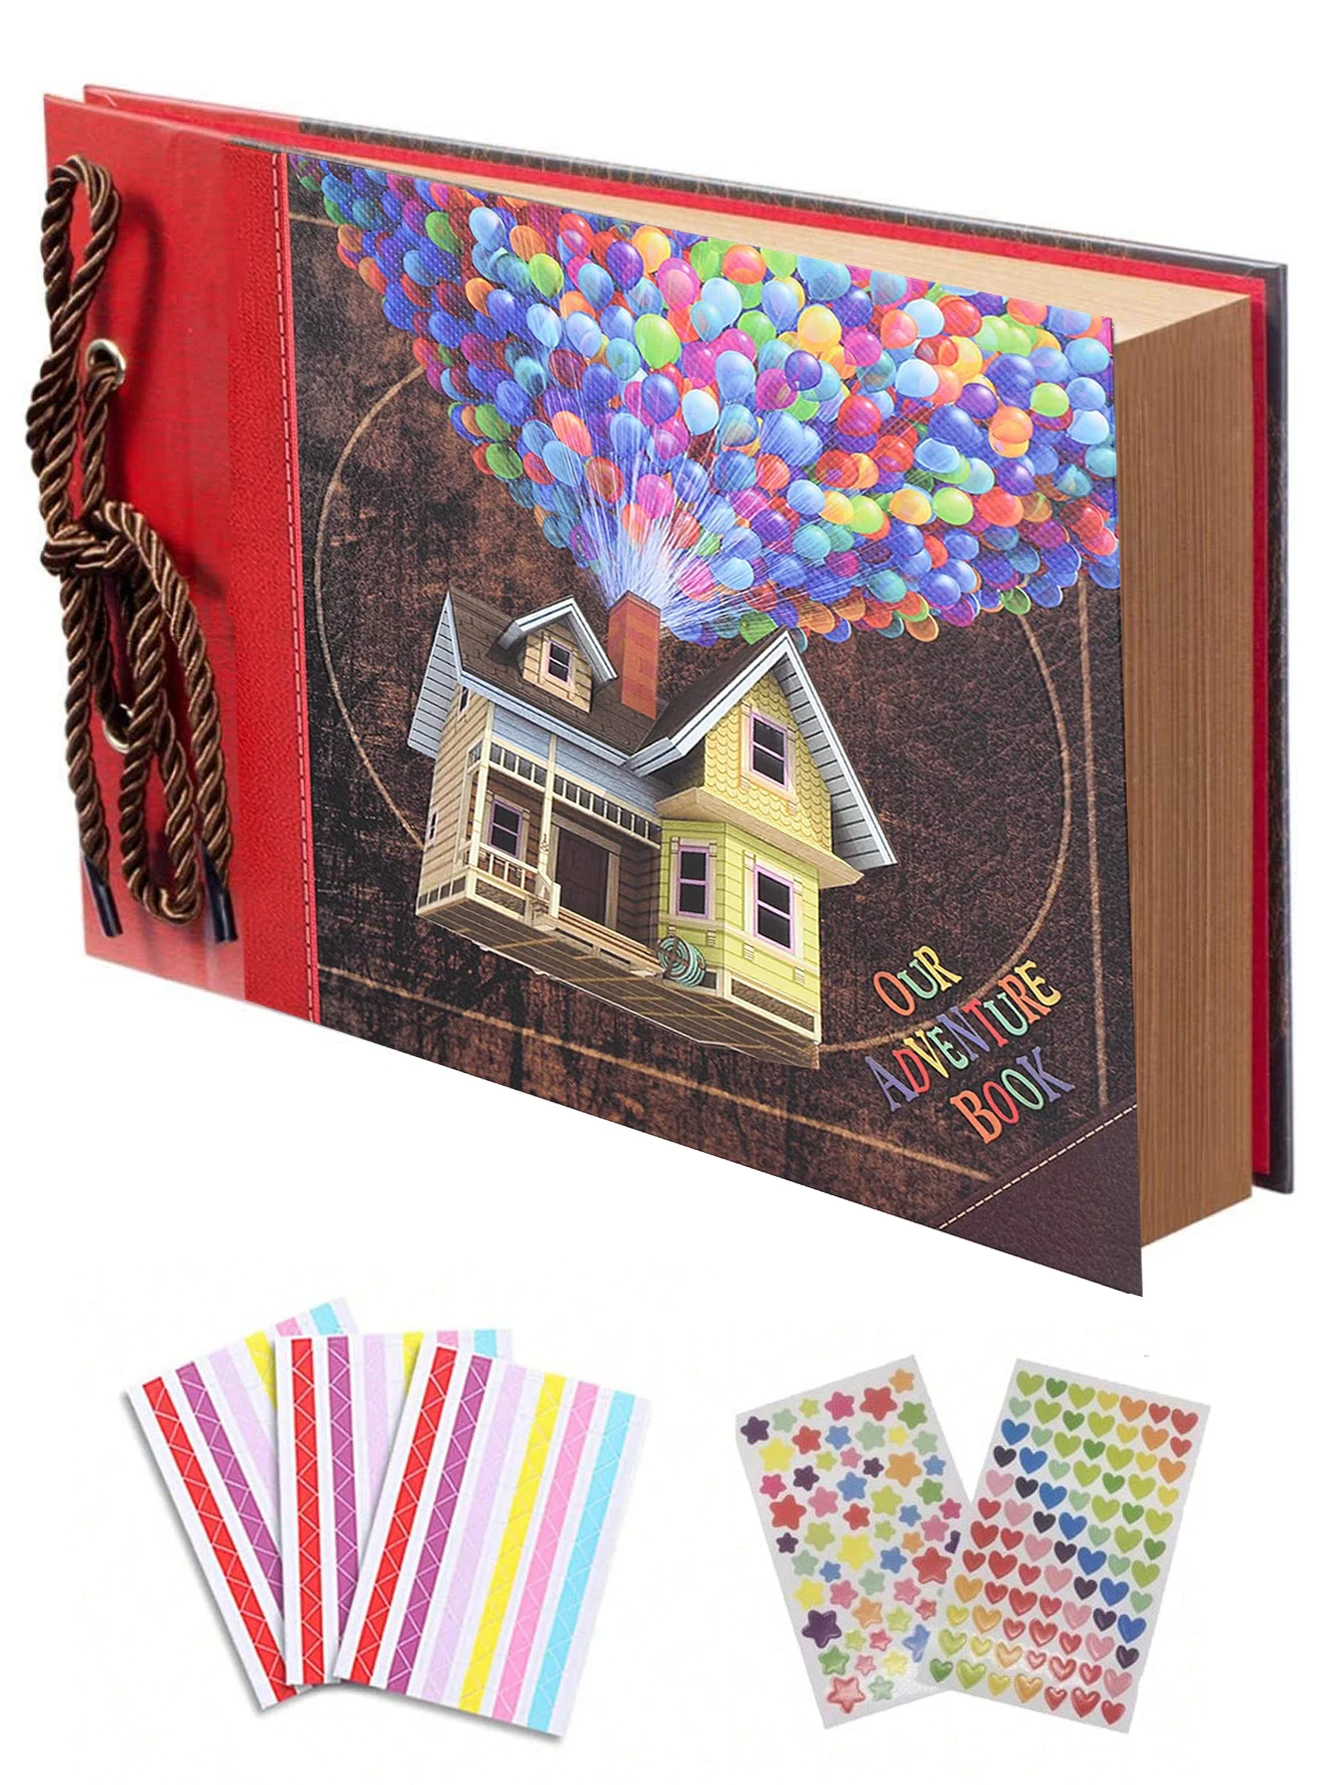 Our Adventure Book, Leather Cover With Balloon House, Scrapbooking Album  With Retro Craft Paper, 29 X 19cm, 60 Pages - Scrapbooking Sets - AliExpress